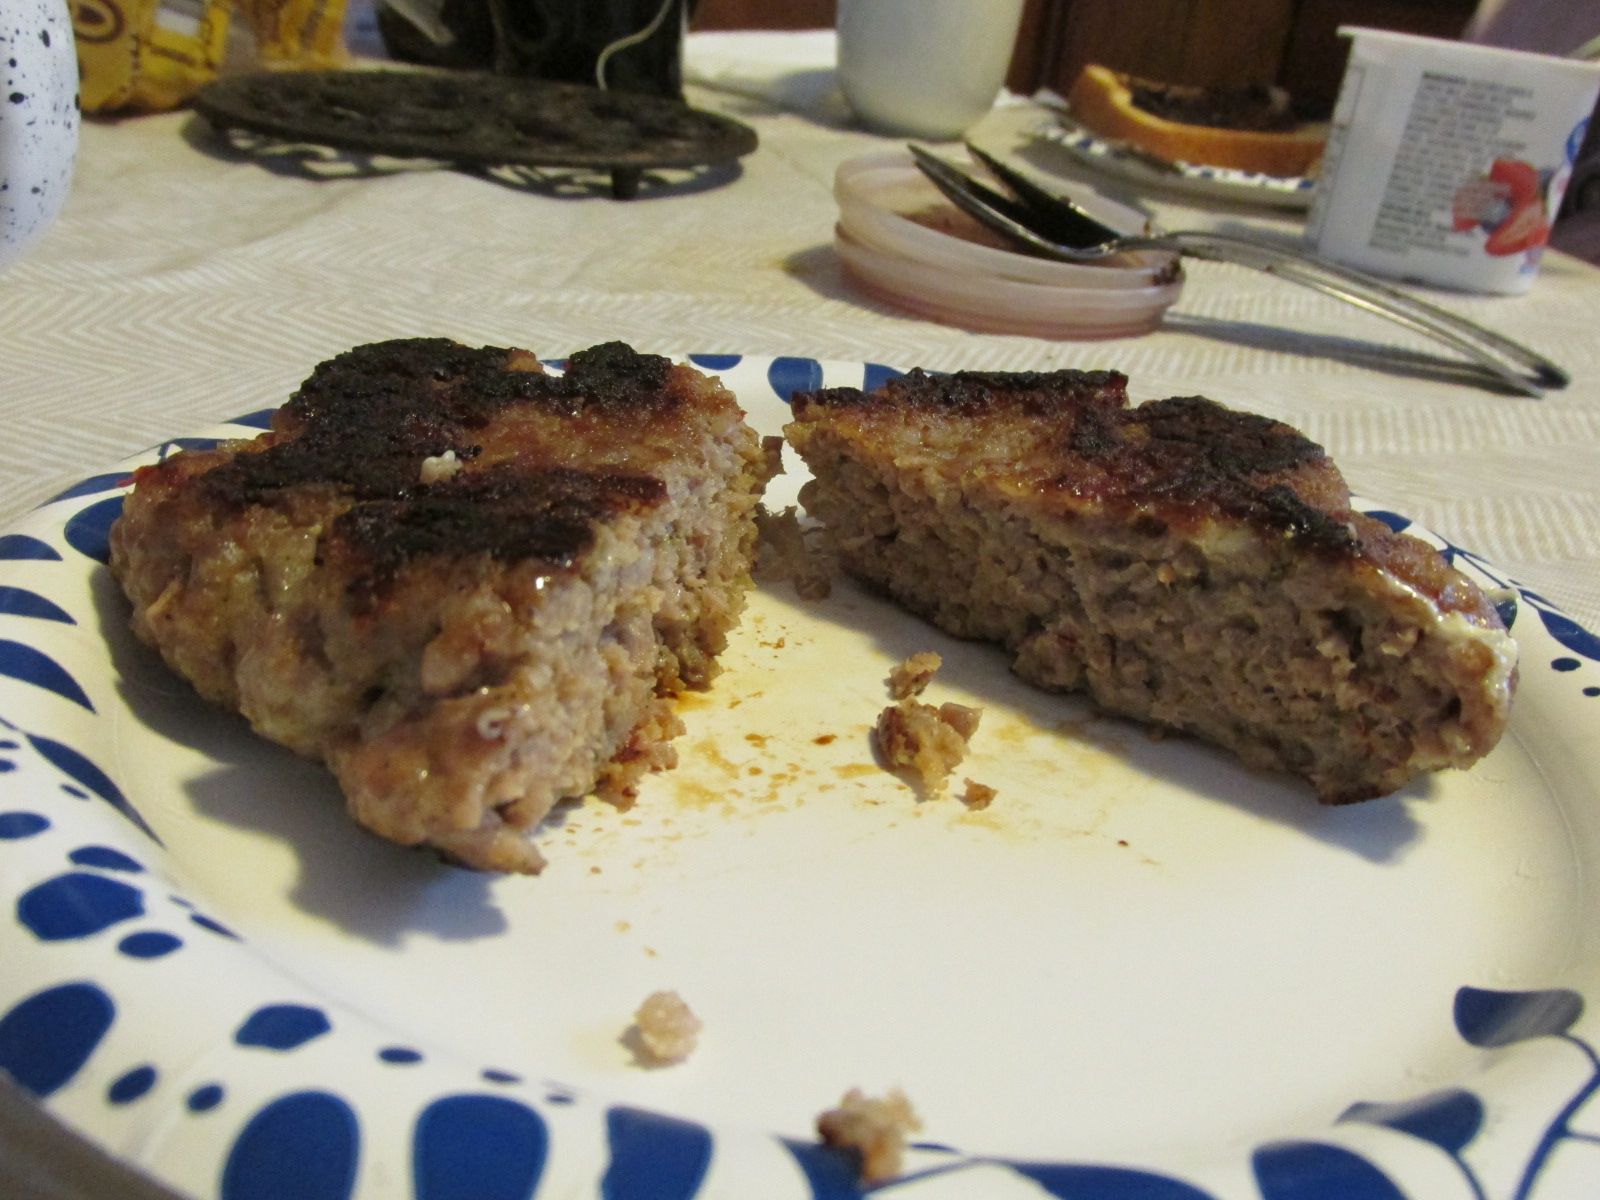 240221 003 cooked sausage pattty 003.jpg